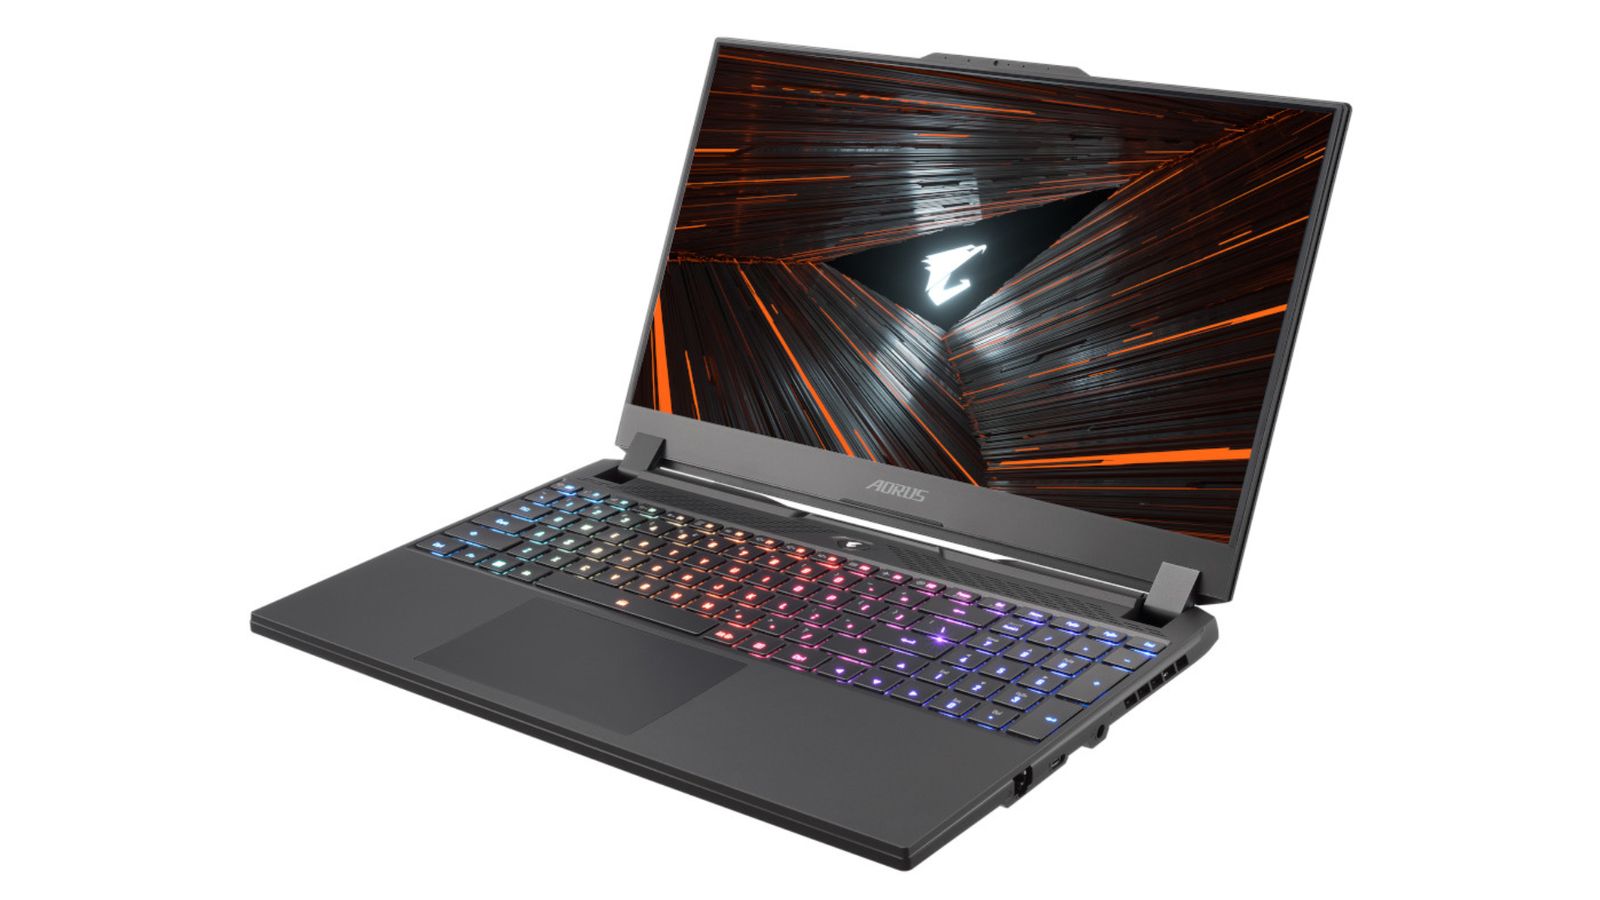 Best Forza gaming laptop - Gigabyte AORUS 17 product image of a dark grey laptop featuring multicoloured backlit buttons and an orange and black pattern on the display.